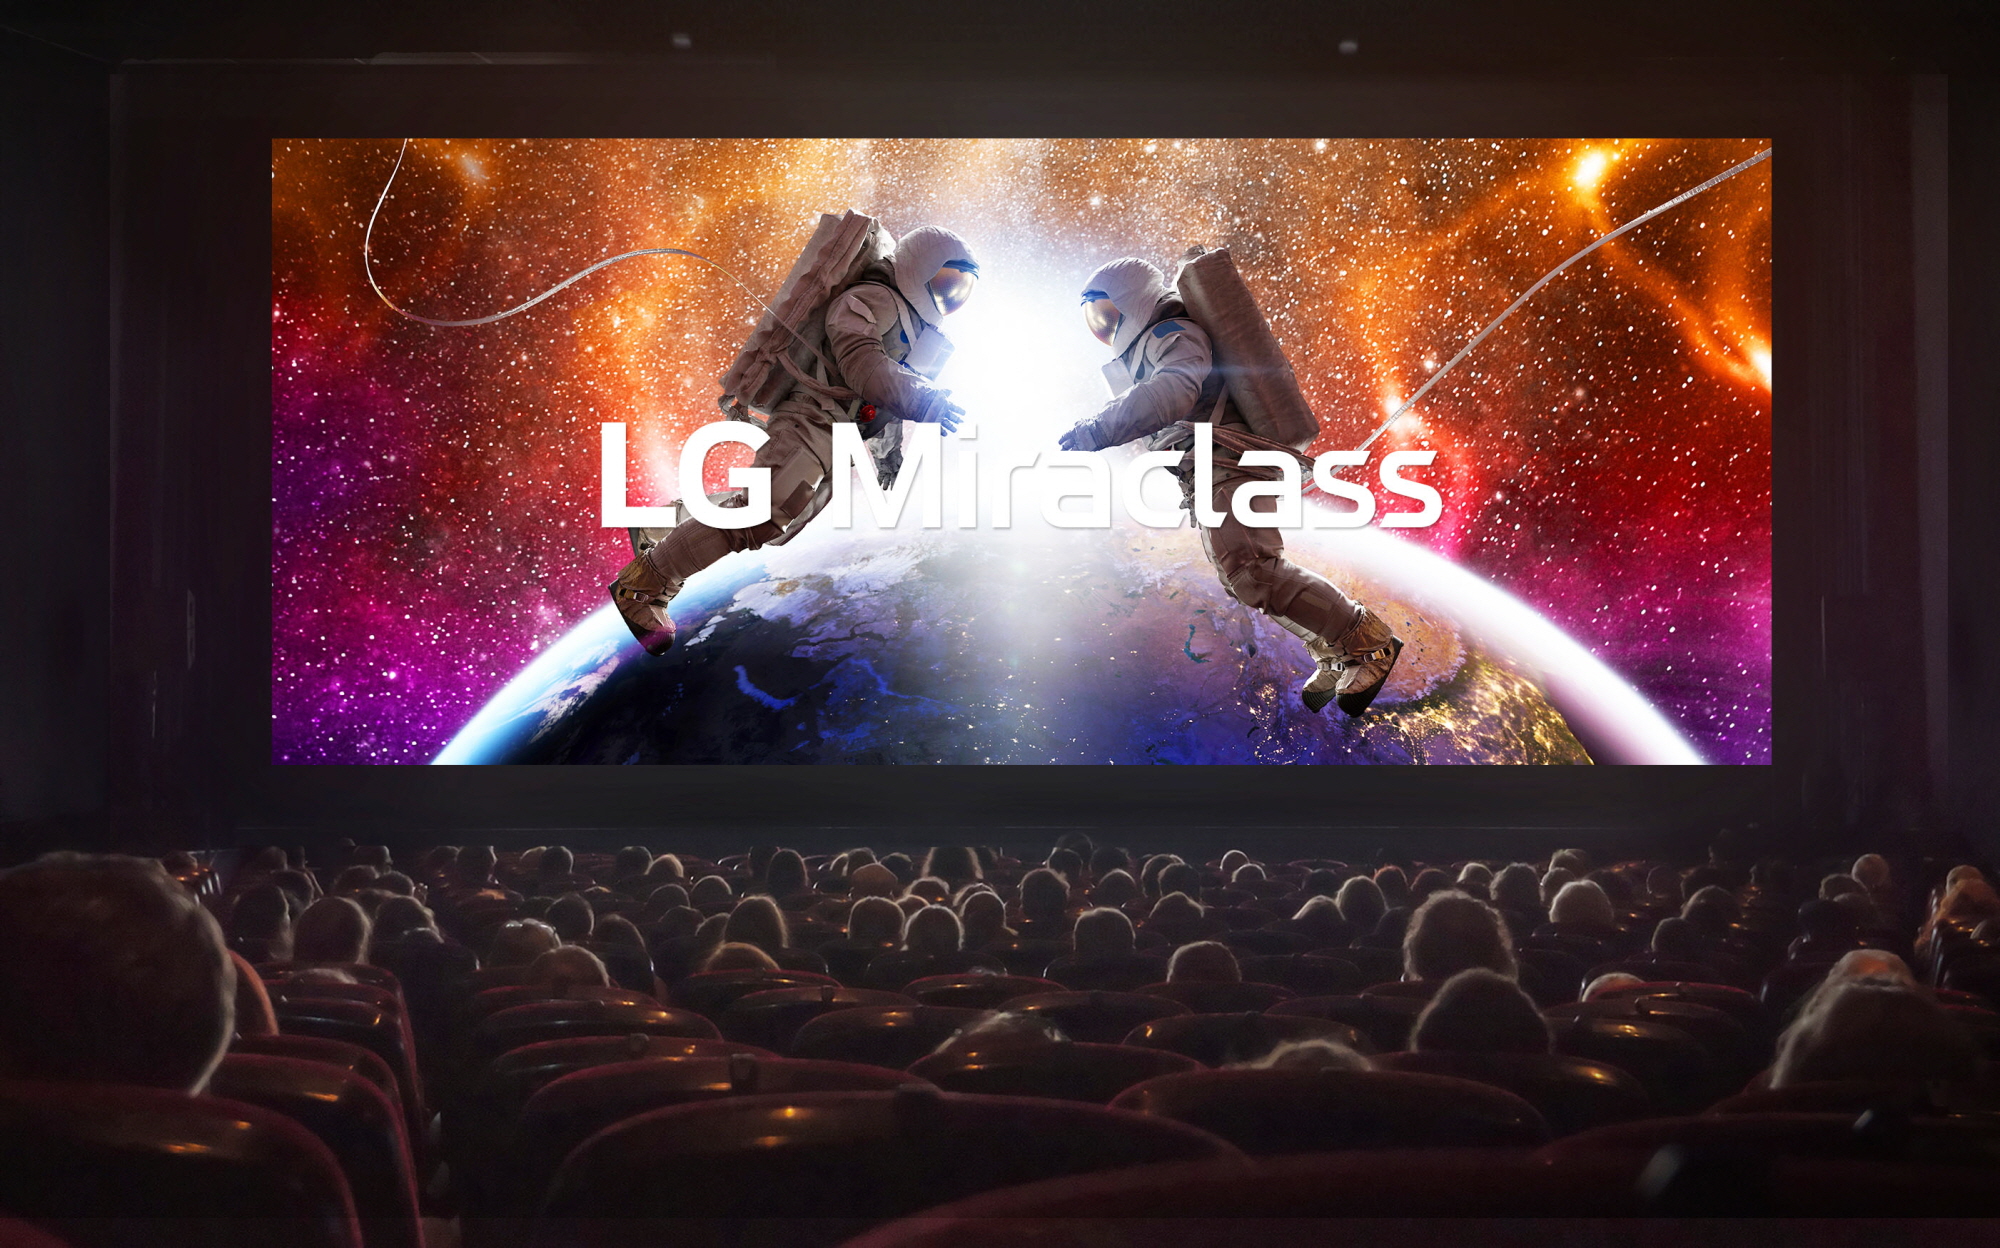 LG's Miraclass line of LED screens takes aim at the movie theater market – Sound & Video Contractor